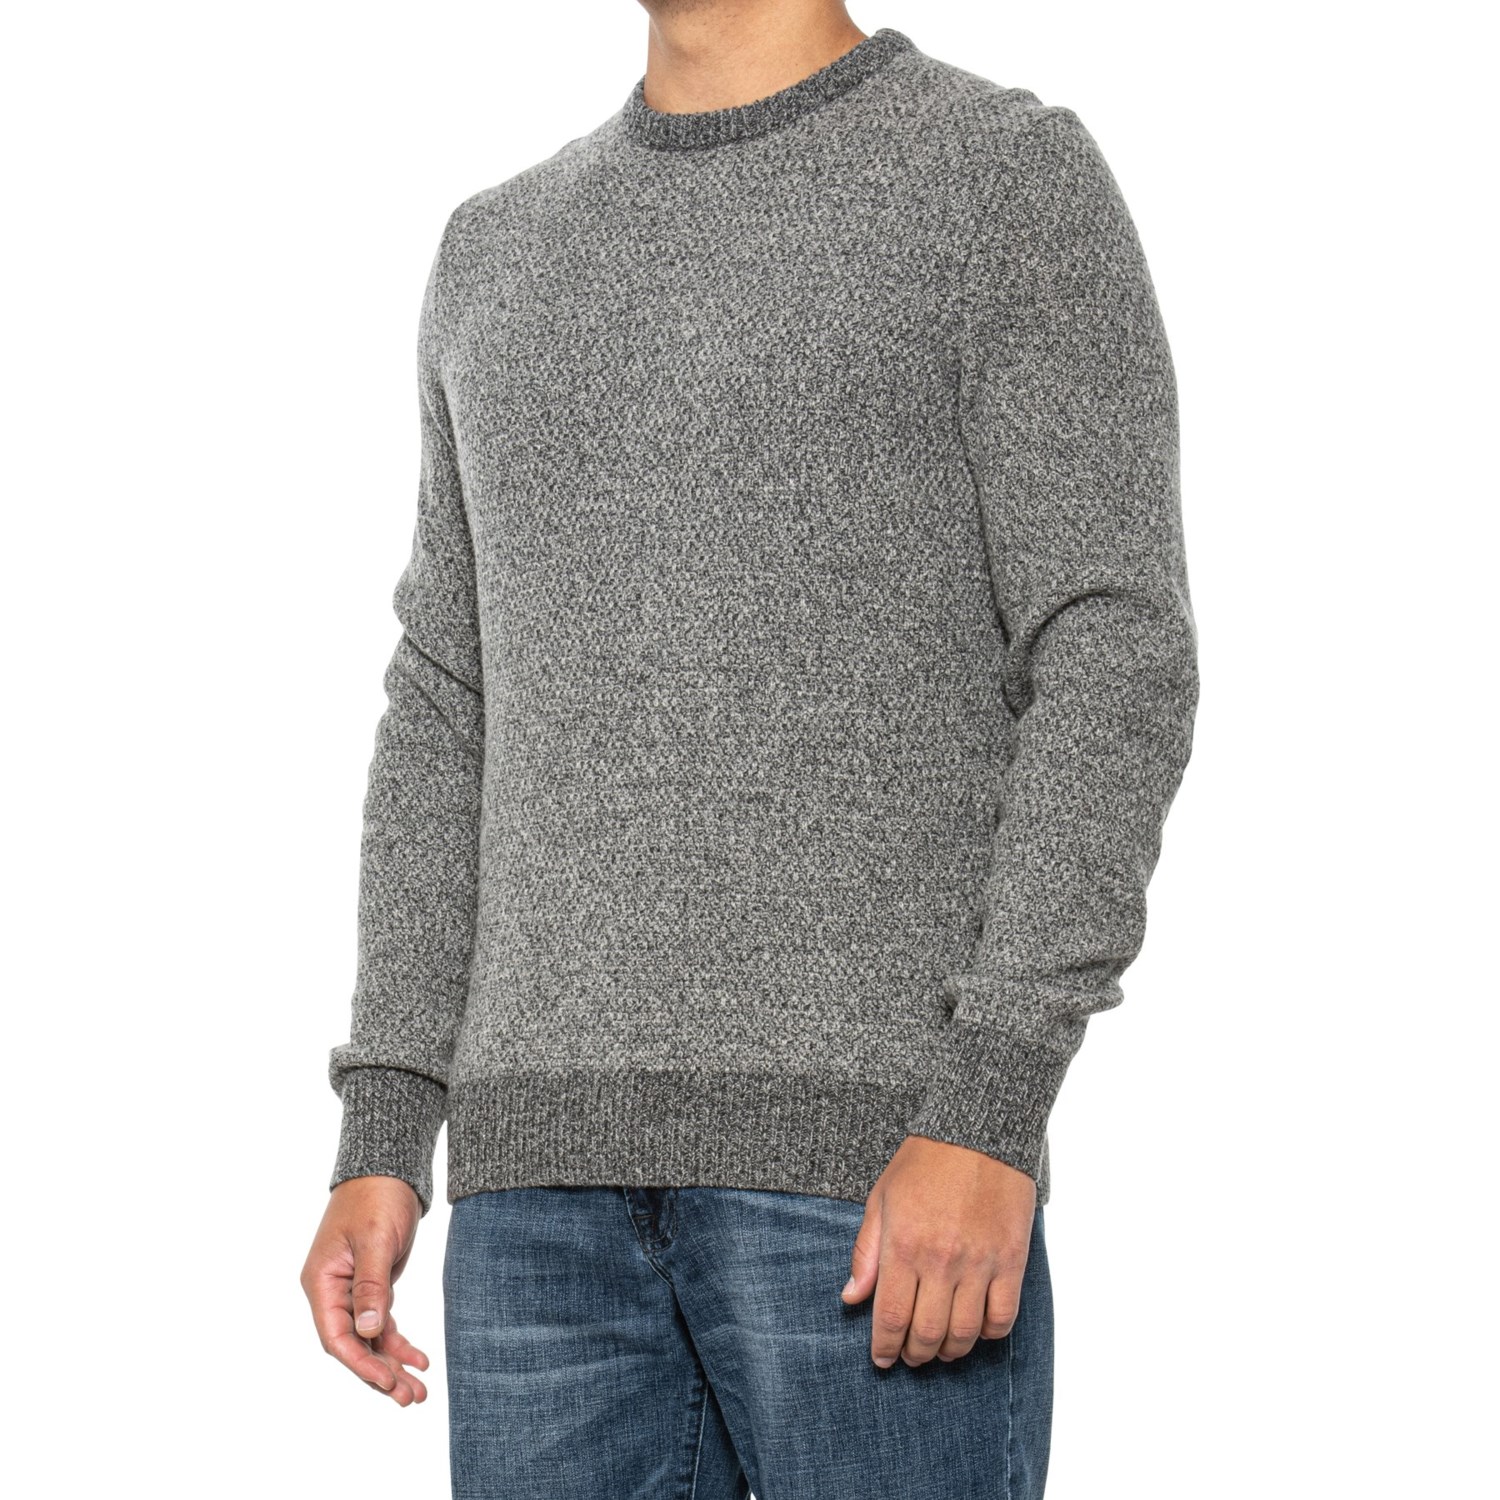 Barbour Harrison Knit Sweater (For Men) - Save 52%